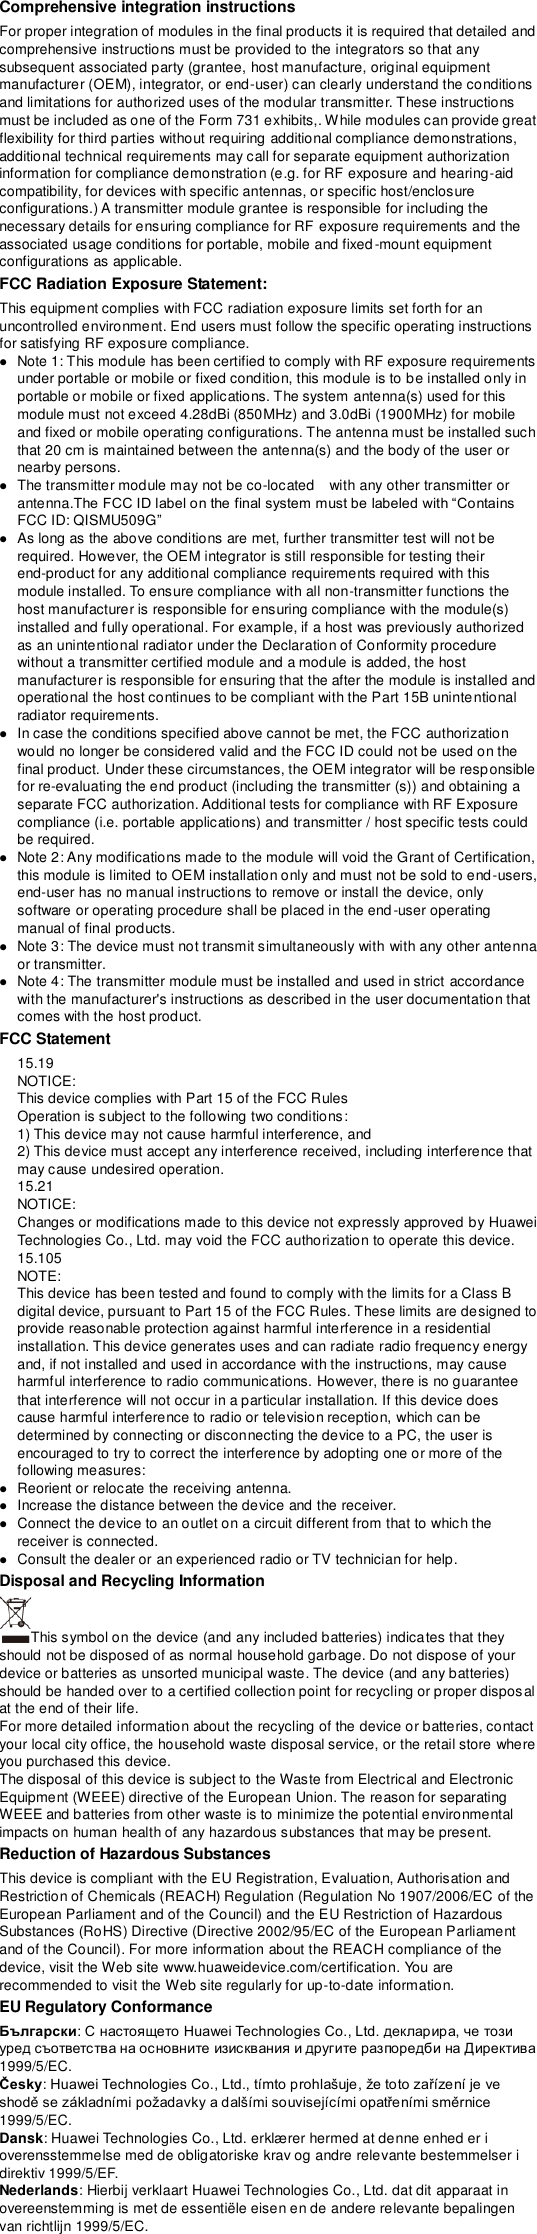 Comprehensive integration instructions   For proper integration of modules in the final products it is required that detailed and comprehensive instructions must be provided to the integrators so that any subsequent associated party (grantee, host manufacture, original equipment manufacturer (OEM), integrator, or end-user) can clearly understand the conditions and limitations for authorized uses of the modular transmitter. These instructions must be included as one of the Form 731 exhibits,. While modules can provide great flexibility for third parties without requiring additional compliance demonstrations, additional technical requirements may call for separate equipment authorization information for compliance demonstration (e.g. for RF exposure and hearing-aid compatibility, for devices with specific antennas, or specific host/enclosure configurations.) A transmitter module grantee is responsible for including the necessary details for ensuring compliance for RF exposure requirements and the associated usage conditions for portable, mobile and fixed-mount equipment configurations as applicable.   FCC Radiation Exposure Statement: This equipment complies with FCC radiation exposure limits set forth for an uncontrolled environment. End users must follow the specific operating instructions for satisfying RF exposure compliance.  Note 1: This module has been certified to comply with RF exposure requirements under portable or mobile or fixed condition, this module is to be installed only in portable or mobile or fixed applications. The system antenna(s) used for this module must not exceed 4.28dBi (850MHz) and 3.0dBi (1900MHz) for mobile and fixed or mobile operating configurations. The antenna must be installed such that 20 cm is maintained between the antenna(s) and the body of the user or nearby persons.  The transmitter module may not be co-located    with any other transmitter or antenna.FCC ID: QISMU509G  As long as the above conditions are met, further transmitter test will not be required. However, the OEM integrator is still responsible for testing their end-product for any additional compliance requirements required with this module installed. To ensure compliance with all non-transmitter functions the host manufacturer is responsible for ensuring compliance with the module(s) installed and fully operational. For example, if a host was previously authorized as an unintentional radiator under the Declaration of Conformity procedure without a transmitter certified module and a module is added, the host manufacturer is responsible for ensuring that the after the module is installed and operational the host continues to be compliant with the Part 15B unintentional radiator requirements.  In case the conditions specified above cannot be met, the FCC authorization would no longer be considered valid and the FCC ID could not be used on the final product. Under these circumstances, the OEM integrator will be responsible for re-evaluating the end product (including the transmitter (s)) and obtaining a separate FCC authorization. Additional tests for compliance with RF Exposure compliance (i.e. portable applications) and transmitter / host specific tests could be required.  Note 2: Any modifications made to the module will void the Grant of Certification, this module is limited to OEM installation only and must not be sold to end-users, end-user has no manual instructions to remove or install the device, only software or operating procedure shall be placed in the end-user operating manual of final products.  Note 3: The device must not transmit simultaneously with with any other antenna or transmitter.  Note 4: The transmitter module must be installed and used in strict accordance with the manufacturer&apos;s instructions as described in the user documentation that comes with the host product. FCC Statement   15.19   NOTICE:   This device complies with Part 15 of the FCC Rules   Operation is subject to the following two conditions:   1) This device may not cause harmful interference, and   2) This device must accept any interference received, including interference that may cause undesired operation.   15.21   NOTICE:   Changes or modifications made to this device not expressly approved by Huawei Technologies Co., Ltd. may void the FCC authorization to operate this device.   15.105   NOTE:   This device has been tested and found to comply with the limits for a Class B digital device, pursuant to Part 15 of the FCC Rules. These limits are designed to provide reasonable protection against harmful interference in a residential installation. This device generates uses and can radiate radio frequency energy and, if not installed and used in accordance with the instructions, may cause harmful interference to radio communications. However, there is no guarantee that interference will not occur in a particular installation. If this device does cause harmful interference to radio or television reception, which can be determined by connecting or disconnecting the device to a PC, the user is encouraged to try to correct the interference by adopting one or more of the following measures:    Reorient or relocate the receiving antenna.    Increase the distance between the device and the receiver.    Connect the device to an outlet on a circuit different from that to which the receiver is connected.    Consult the dealer or an experienced radio or TV technician for help. Disposal and Recycling Information This symbol on the device (and any included batteries) indicates that they should not be disposed of as normal household garbage. Do not dispose of your device or batteries as unsorted municipal waste. The device (and any batteries) should be handed over to a certified collection point for recycling or proper disposal at the end of their life.     For more detailed information about the recycling of the device or batteries, contact your local city office, the household waste disposal service, or the retail store where you purchased this device. The disposal of this device is subject to the Waste from Electrical and Electronic Equipment (WEEE) directive of the European Union. The reason for separating WEEE and batteries from other waste is to minimize the potential environmental impacts on human health of any hazardous substances that may be present. Reduction of Hazardous Substances This device is compliant with the EU Registration, Evaluation, Authorisation and Restriction of Chemicals (REACH) Regulation (Regulation No 1907/2006/EC of the European Parliament and of the Council) and the EU Restriction of Hazardous Substances (RoHS) Directive (Directive 2002/95/EC of the European Parliament and of the Council). For more information about the REACH compliance of the device, visit the Web site www.huaweidevice.com/certification. You are recommended to visit the Web site regularly for up-to-date information. EU Regulatory Conformance Български1999/5/EC. Česky1999/5/EC. Dansk: Huawei Technologies Co., Ltd. erklæ rer hermed at denne enhed er i overensstemmelse med de obligatoriske krav og andre relevante bestemmelser i direktiv 1999/5/EF. Nederlands: Hierbij verklaart Huawei Technologies Co., Ltd. dat dit apparaat in overeenstemming is met de essentiële eisen en de andere relevante bepalingen van richtlijn 1999/5/EC. 